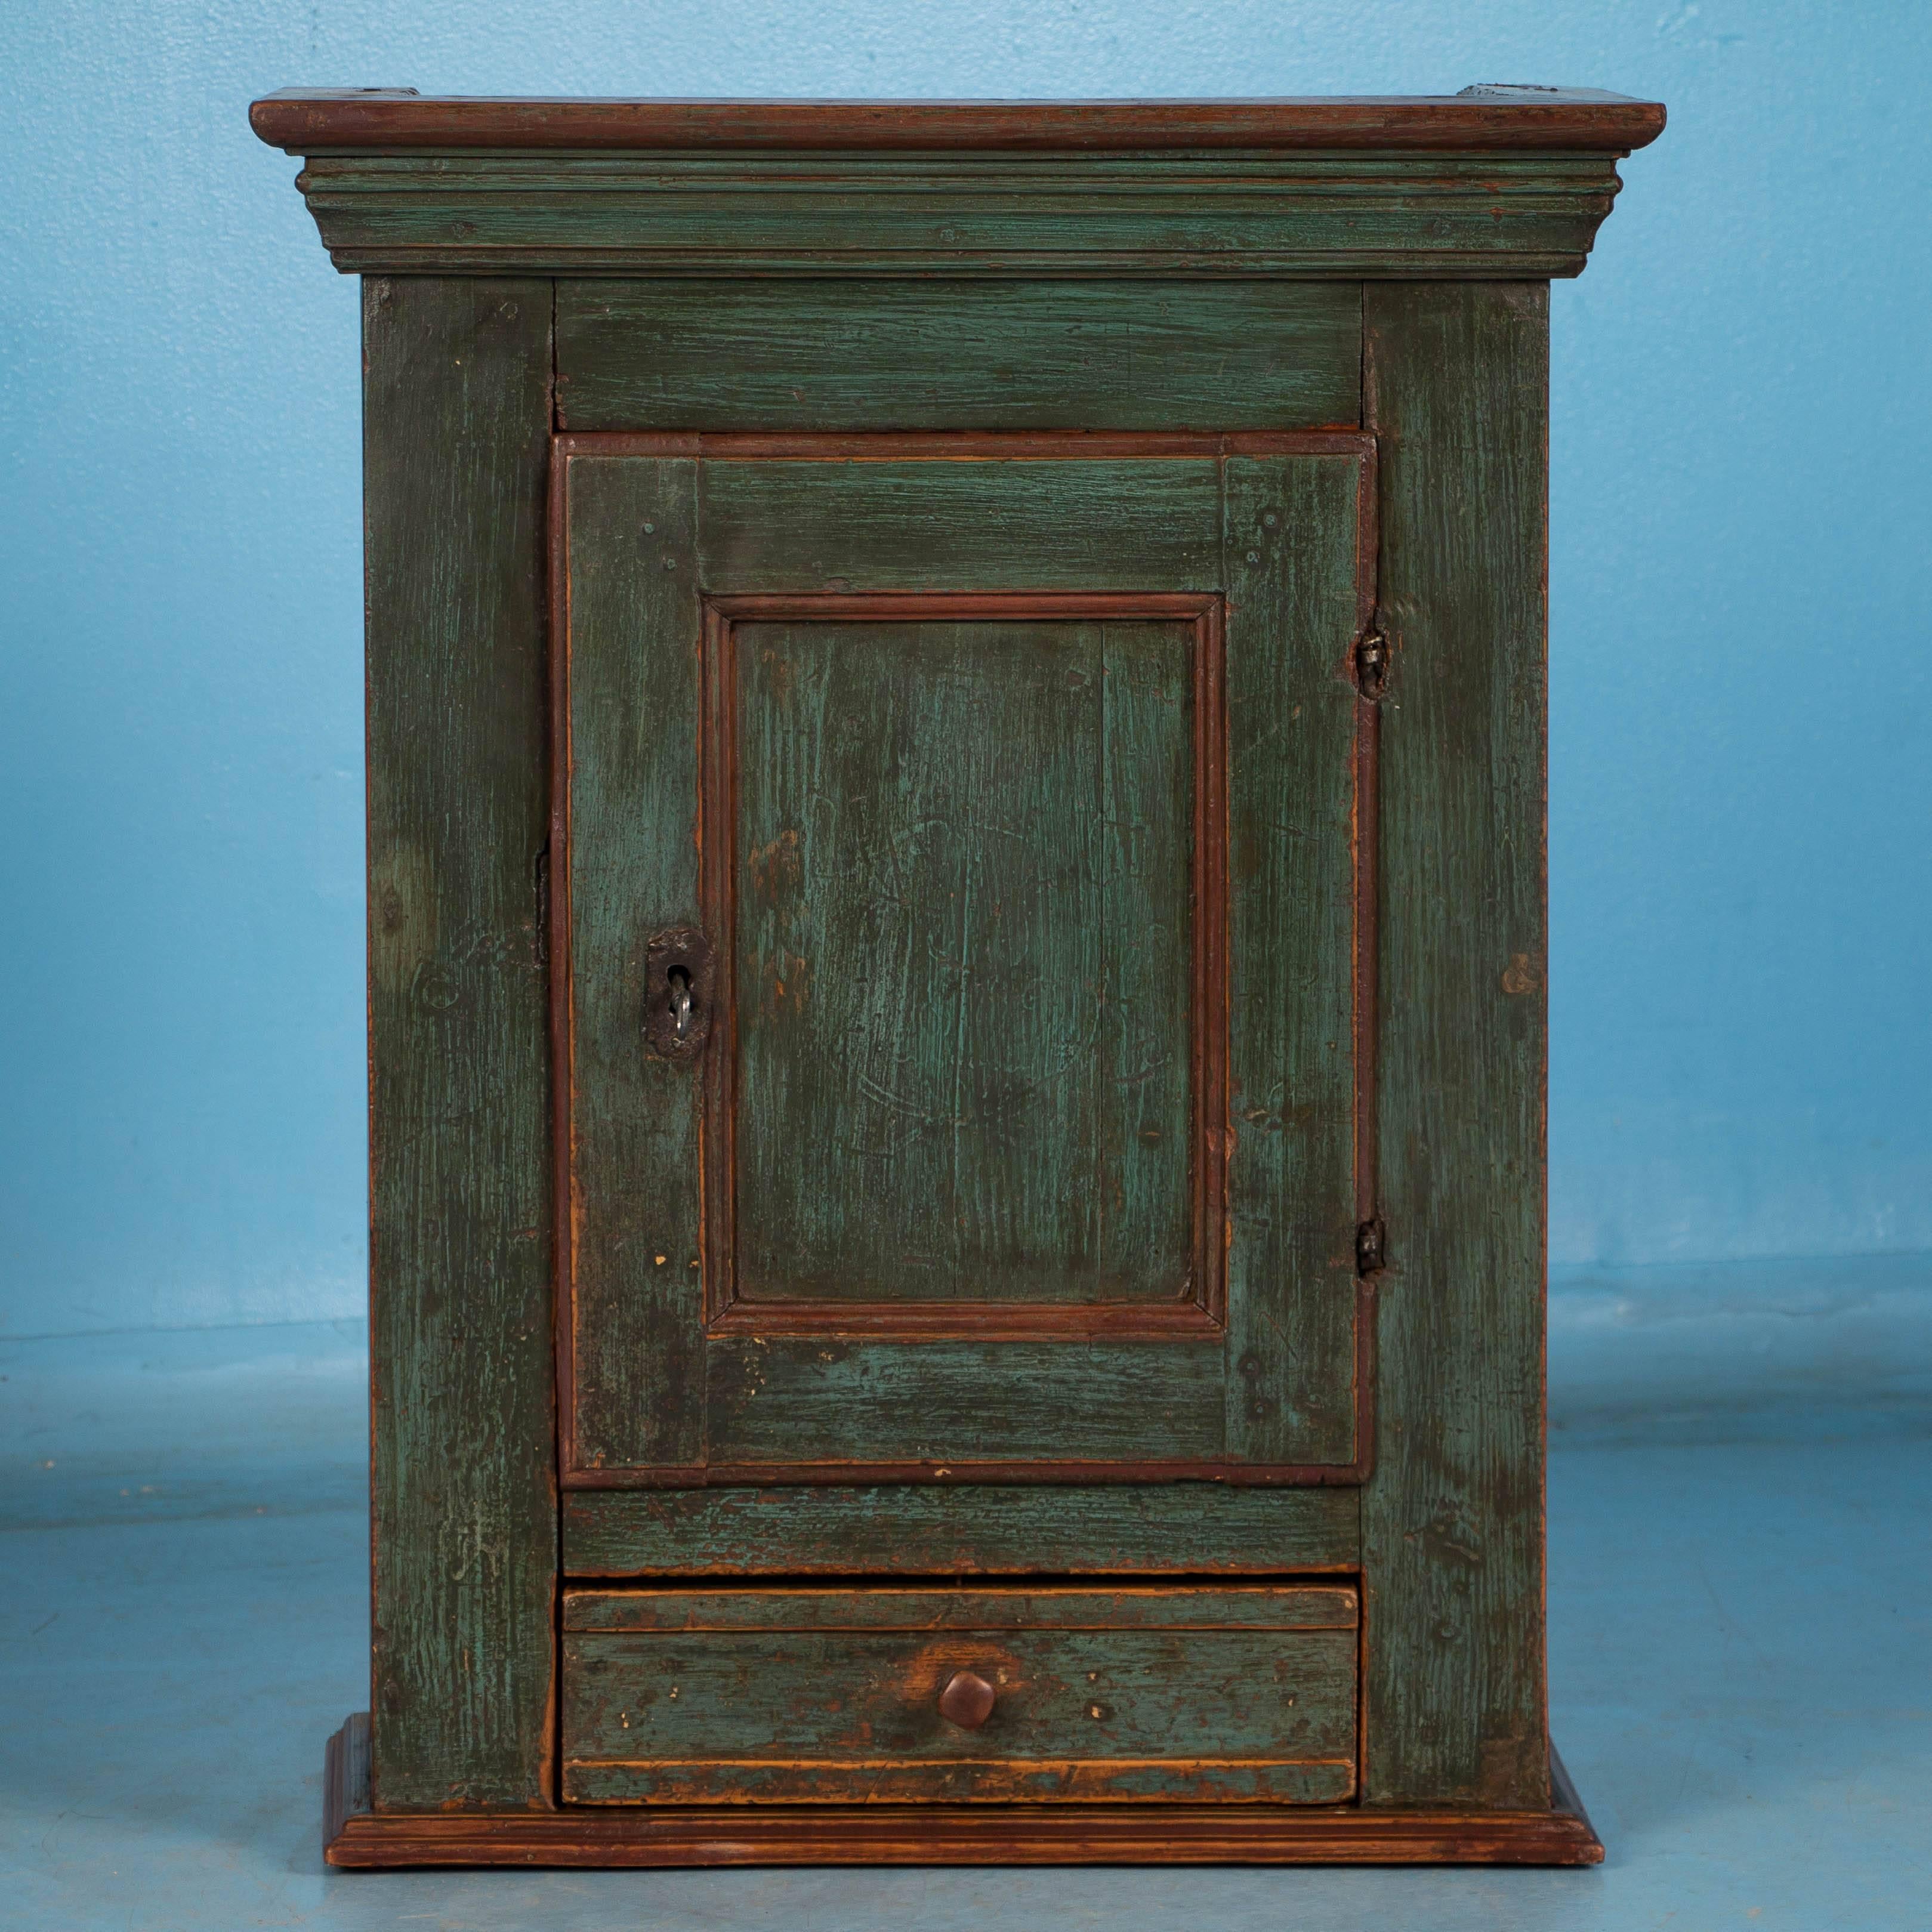 This charming hanging cupboard from Denmark is exceptional due to the aged patina of the original green paint over the pine case. Take note of the two shelves inside and the unique pin that locks the drawer. The cabinet has been professionally